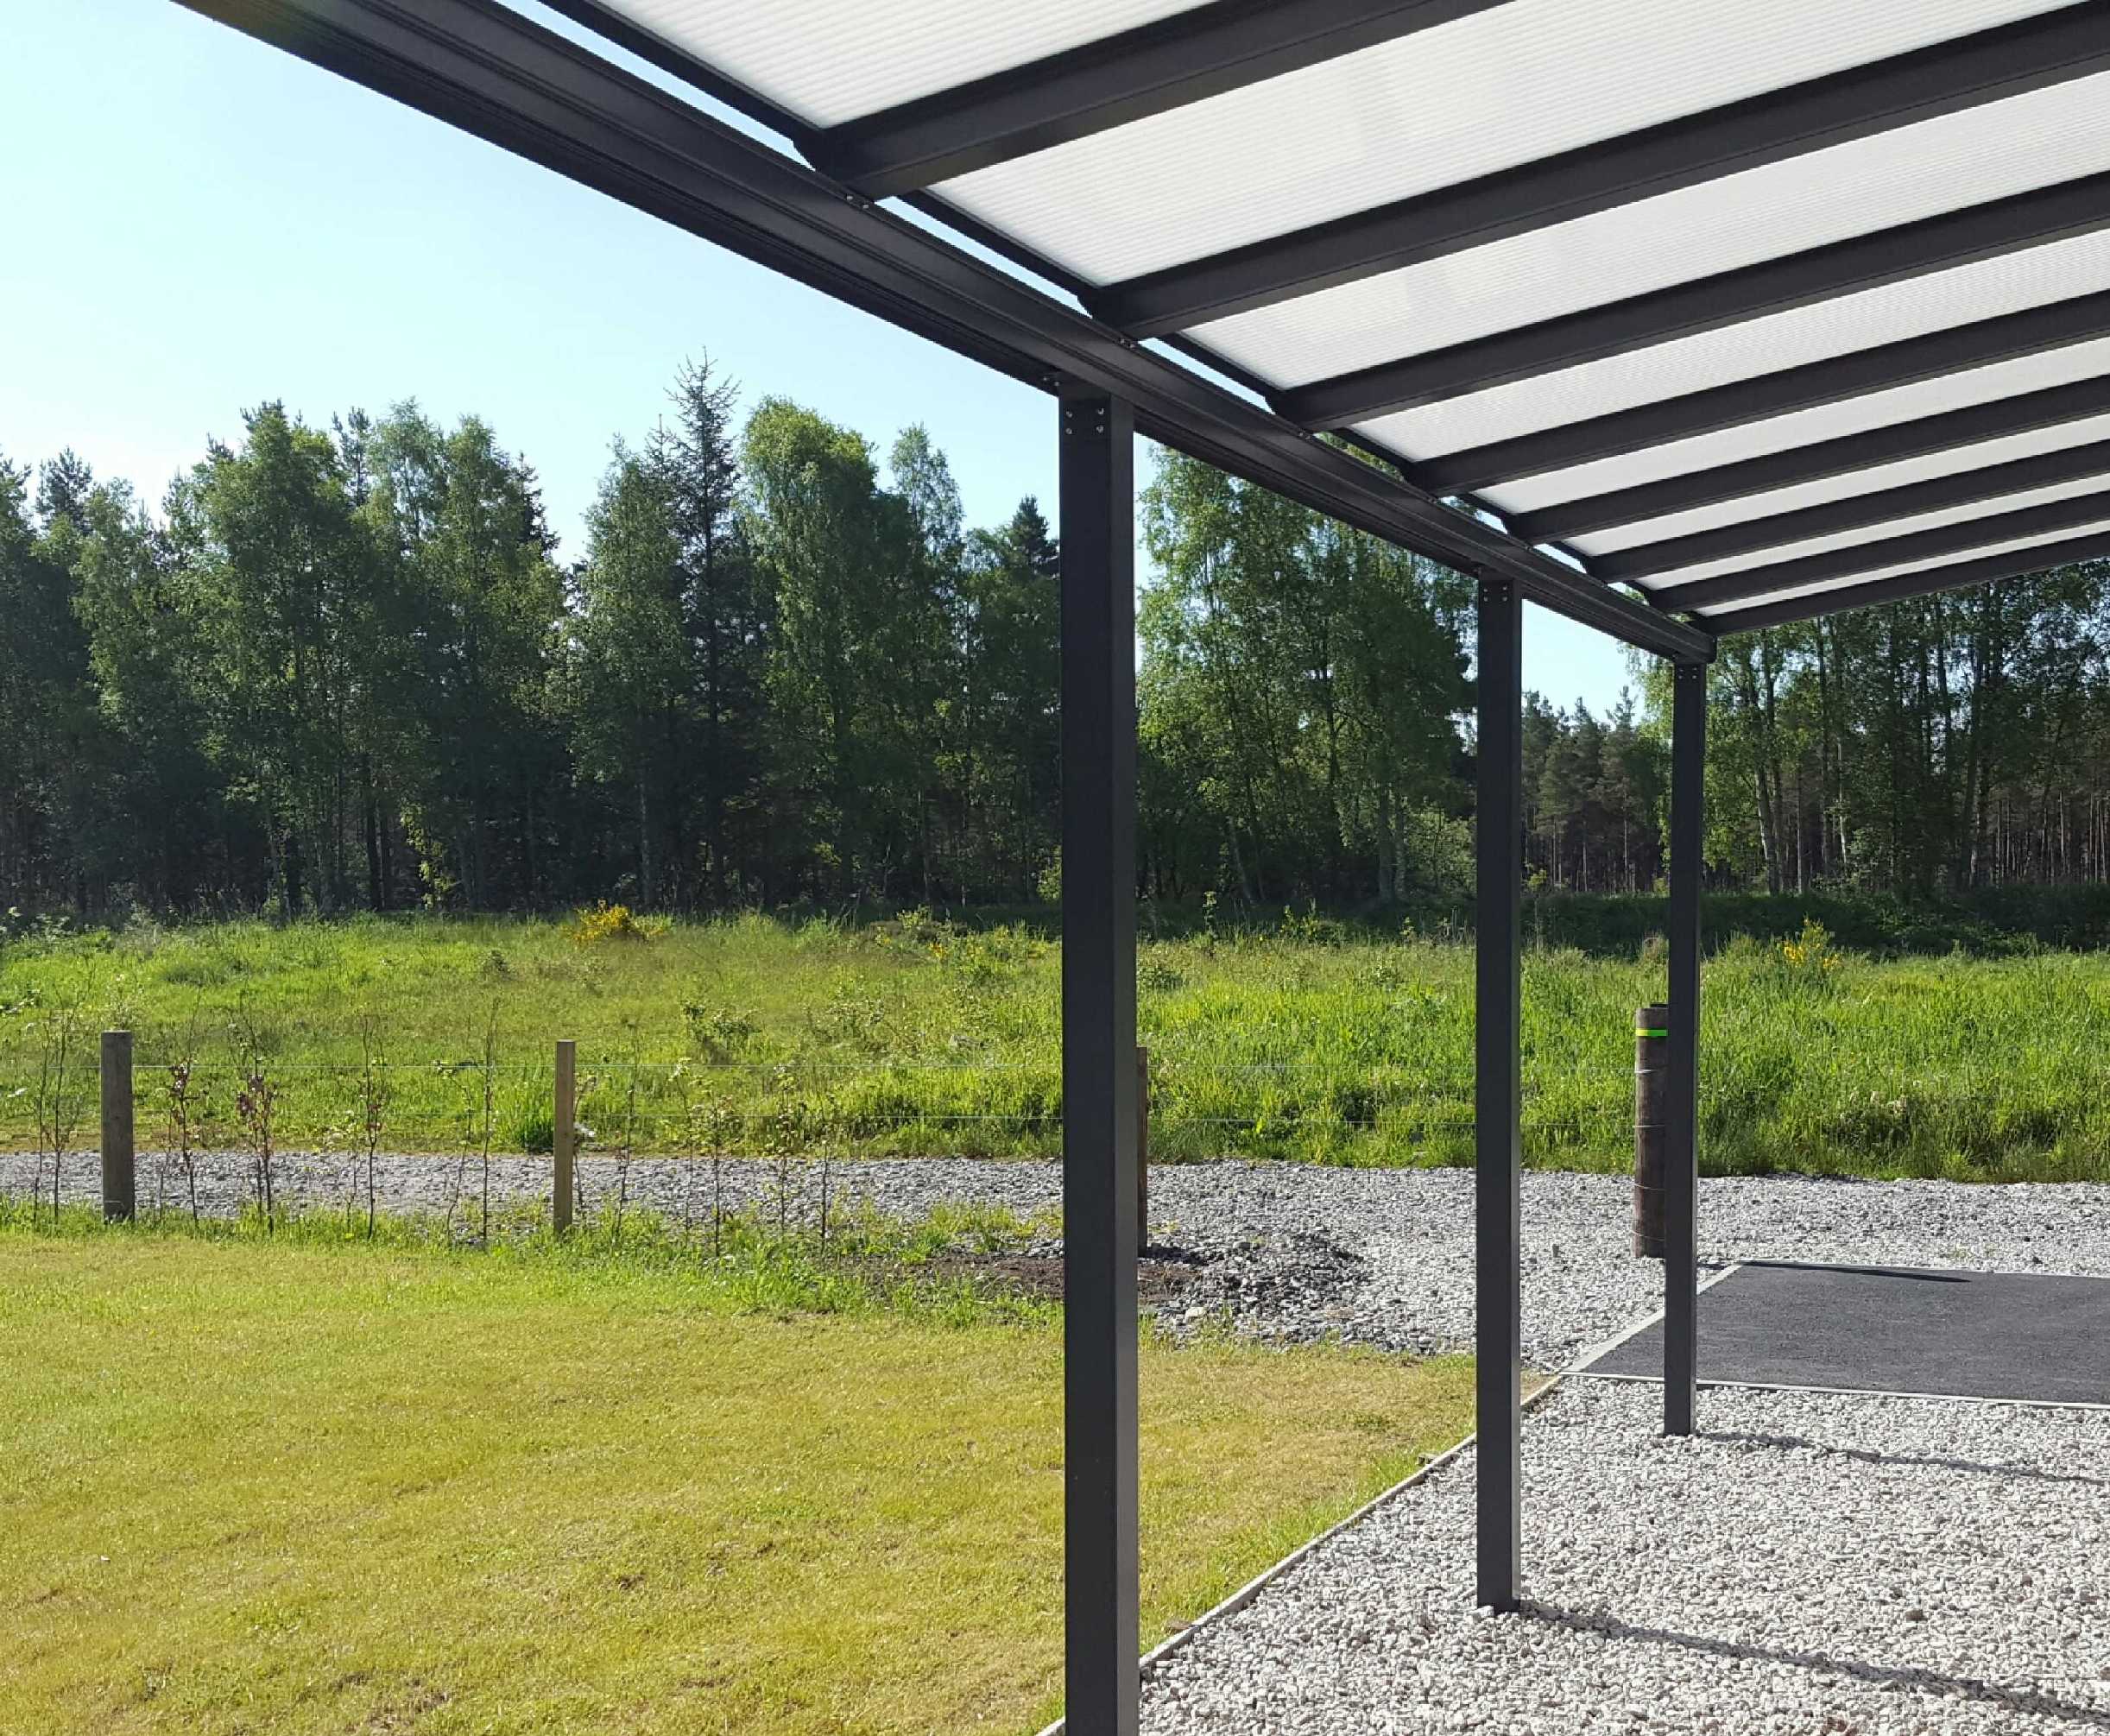 Omega Smart Lean-To Canopy, Anthracite Grey, 6mm Glass Clear Plate Polycarbonate Glazing - 2.1m (W) x 3.0m (P), (2) Supporting Posts